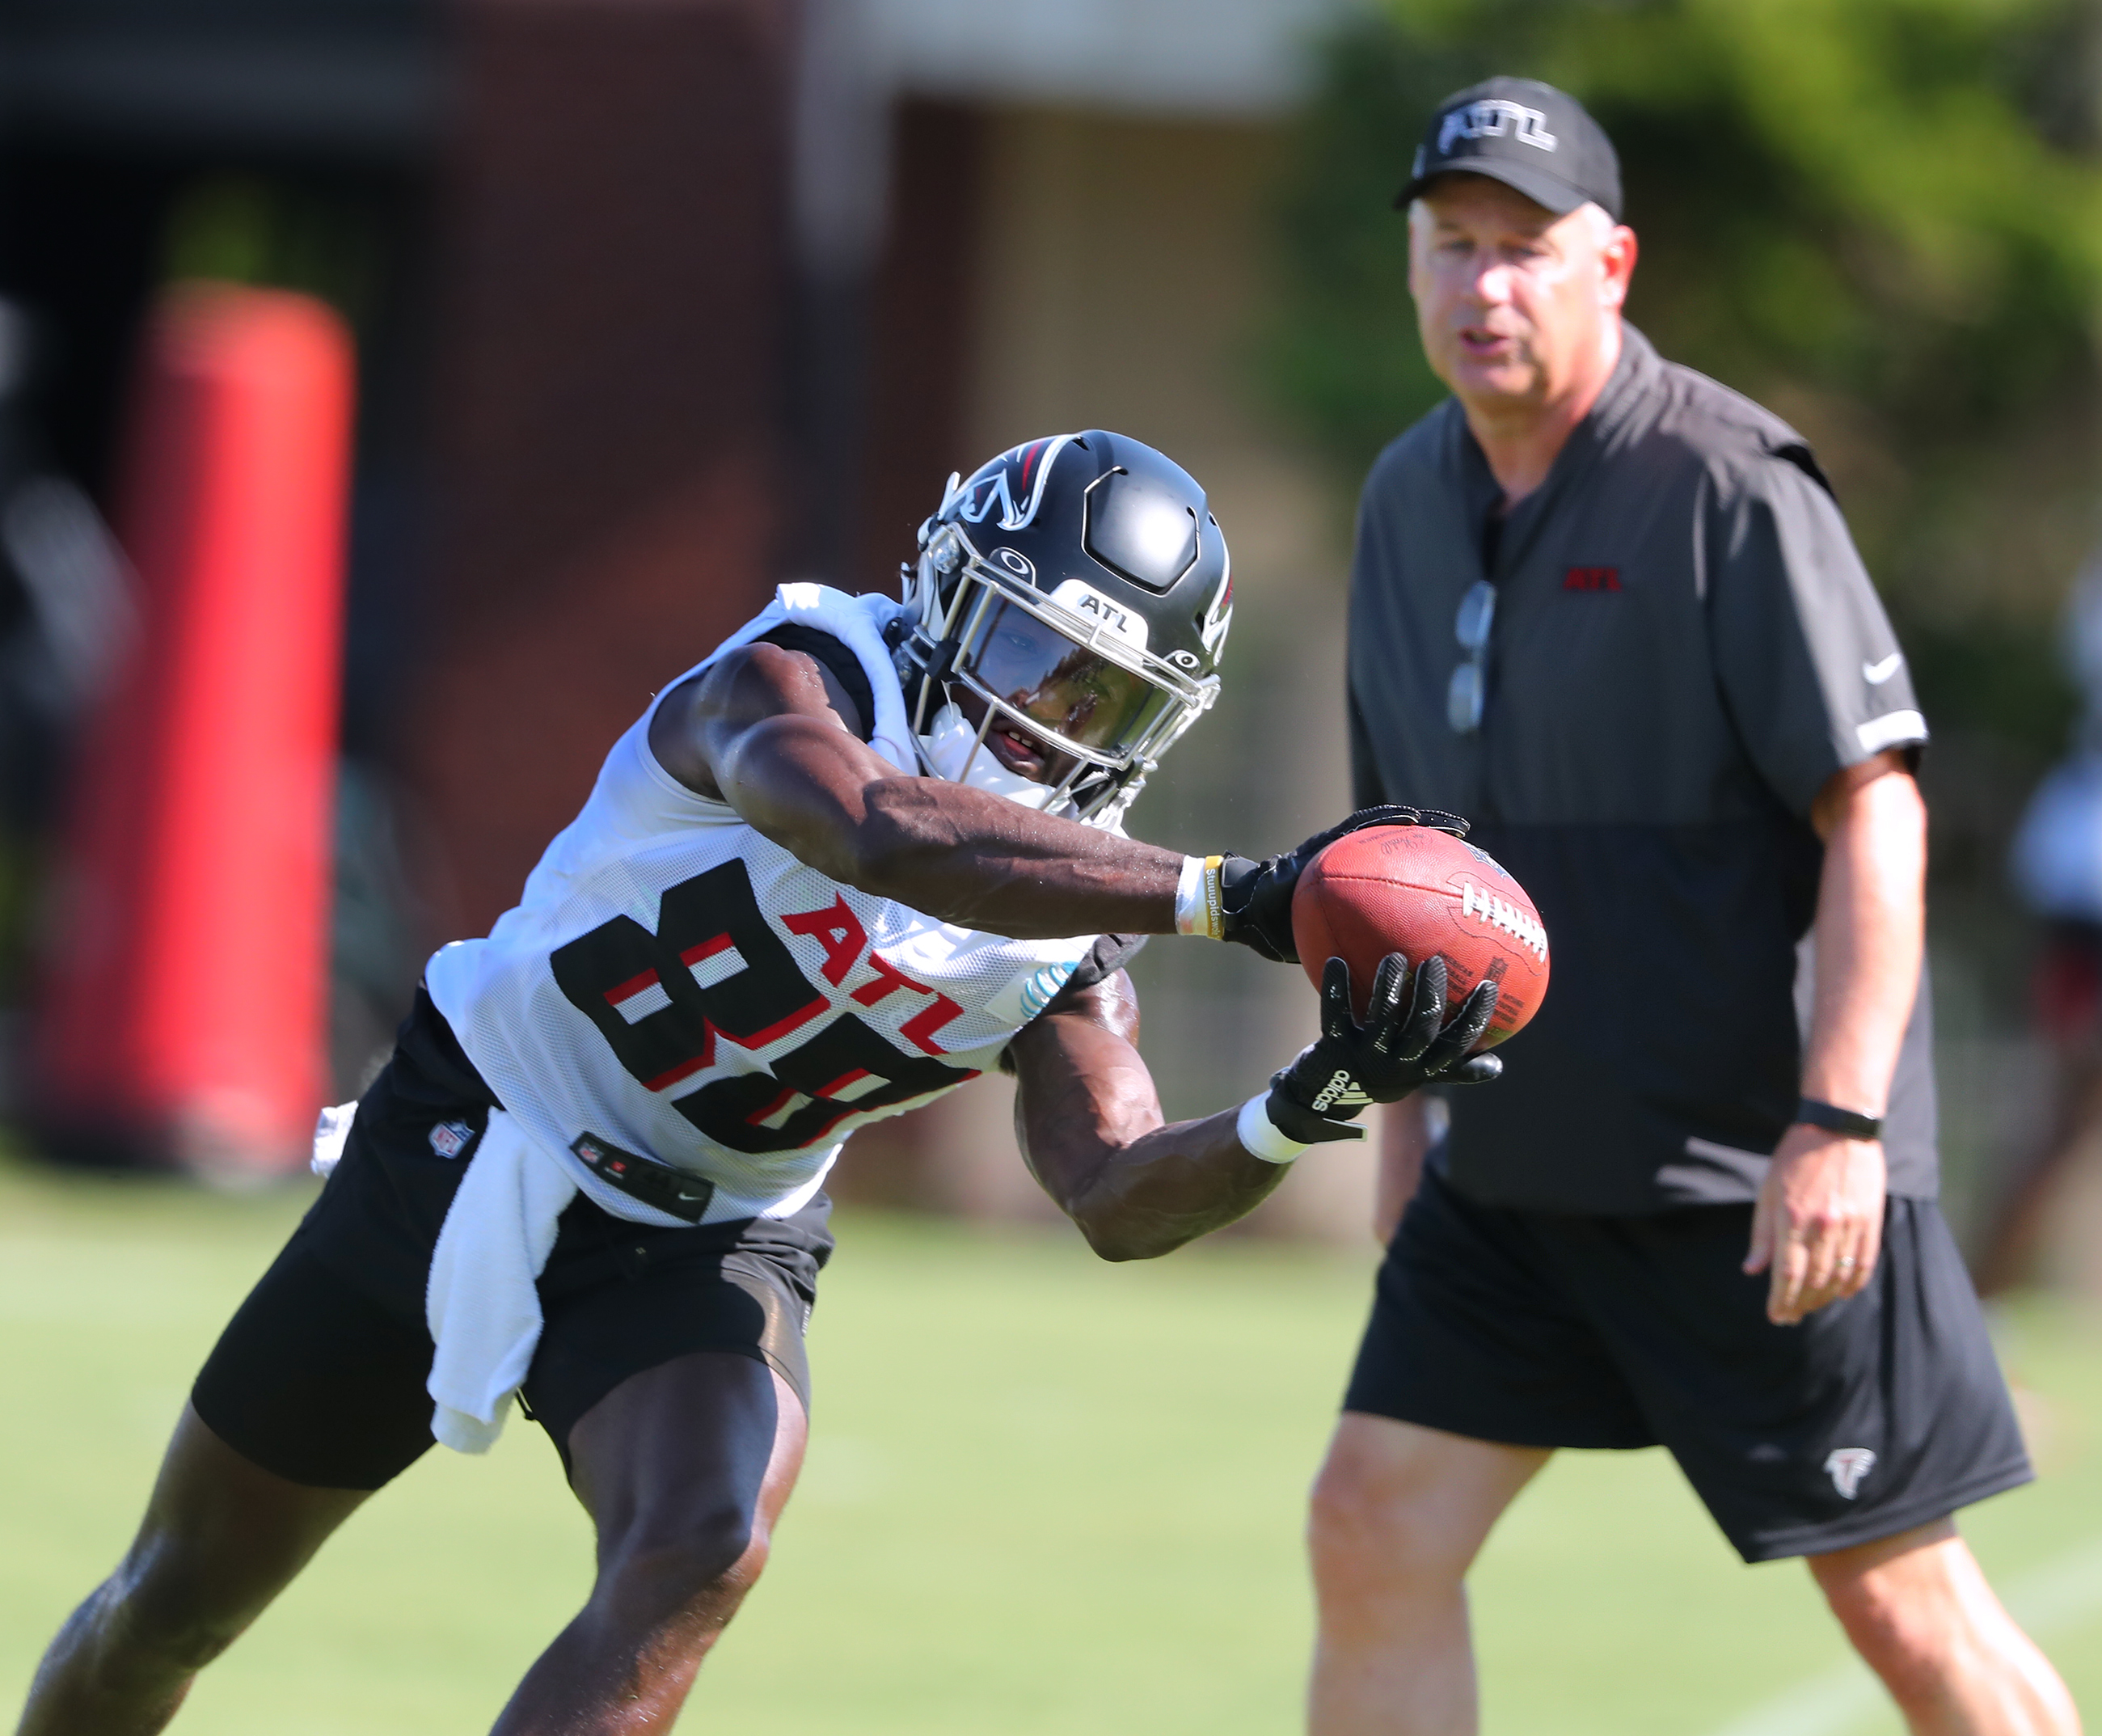 Injury report: Falcons WR Frank Darby out for Bucs' game